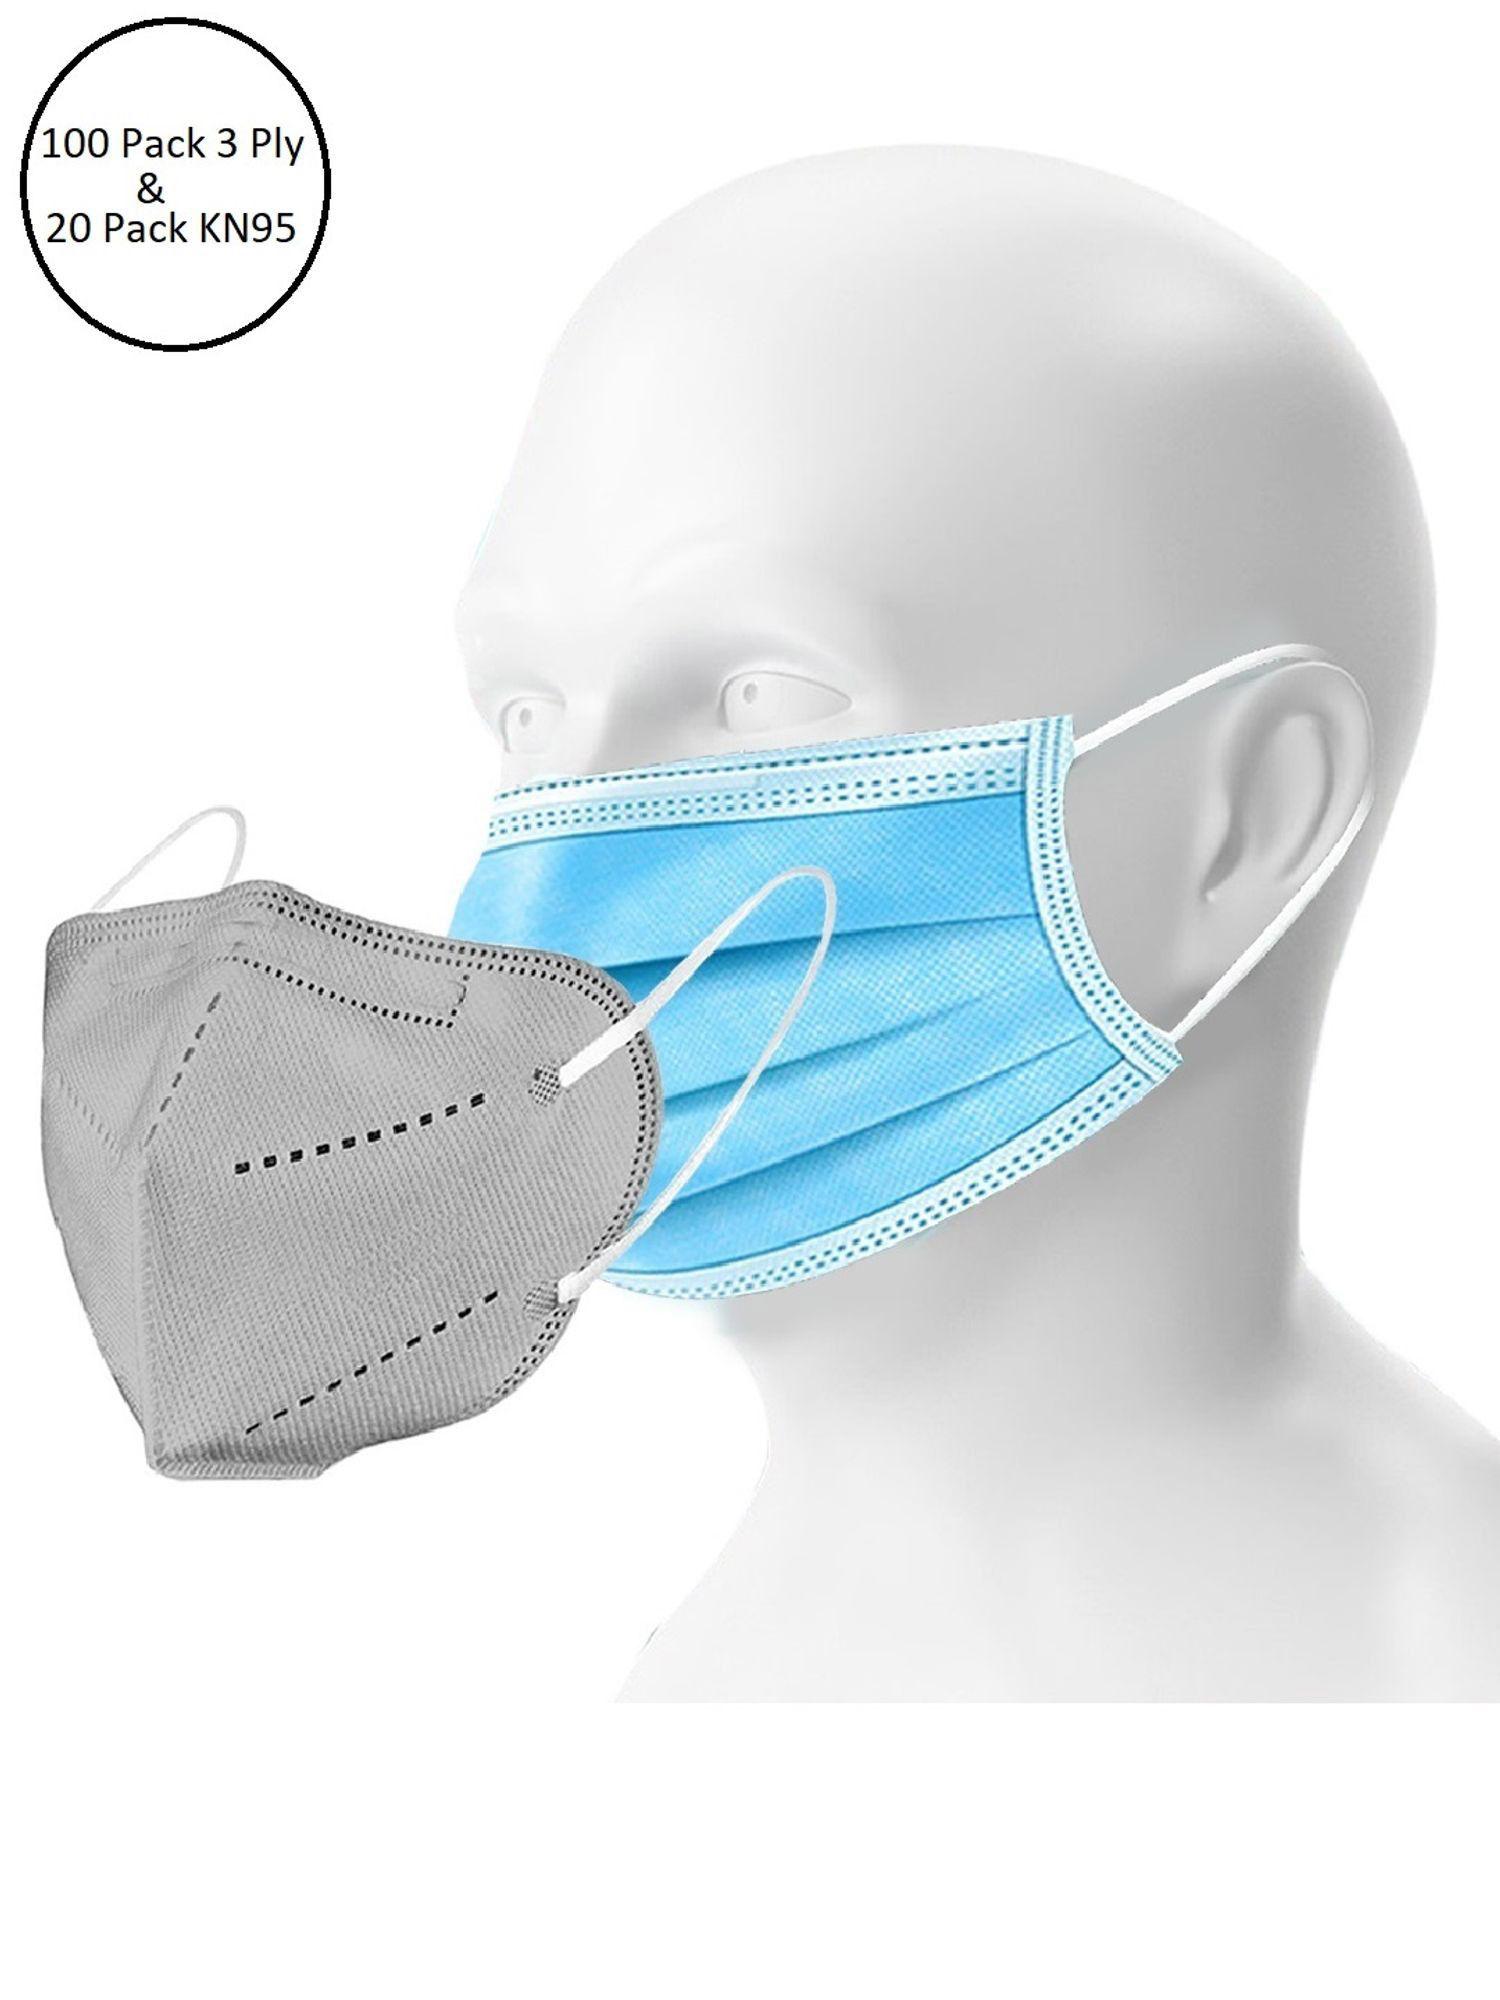 double mask set of 100 disposable 3 ply & 20 kn95 n95 masks